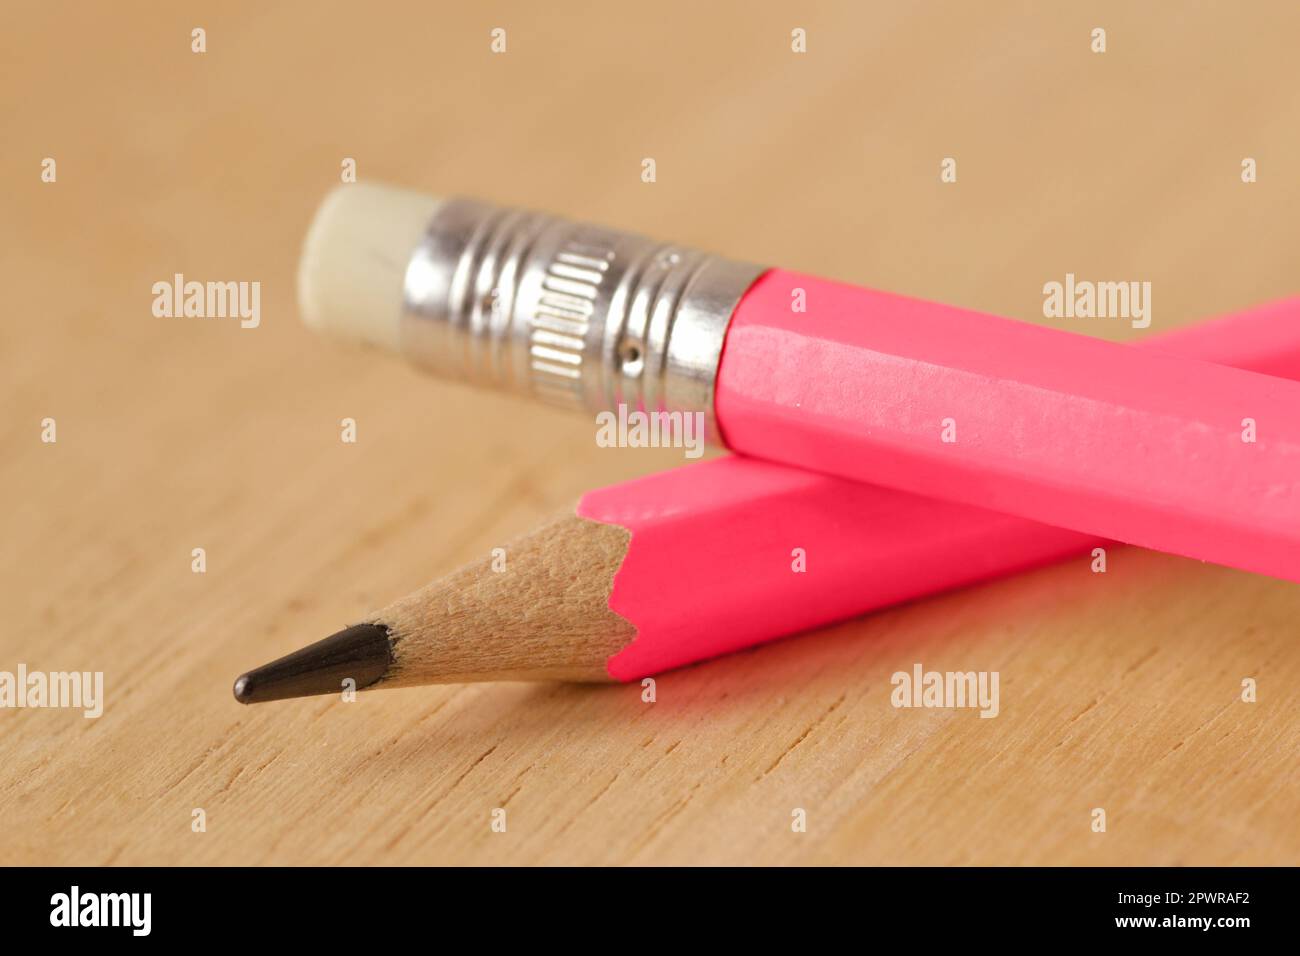 Close-up of pink pencil tip and eraser - Concept of women and creative thinking Stock Photo